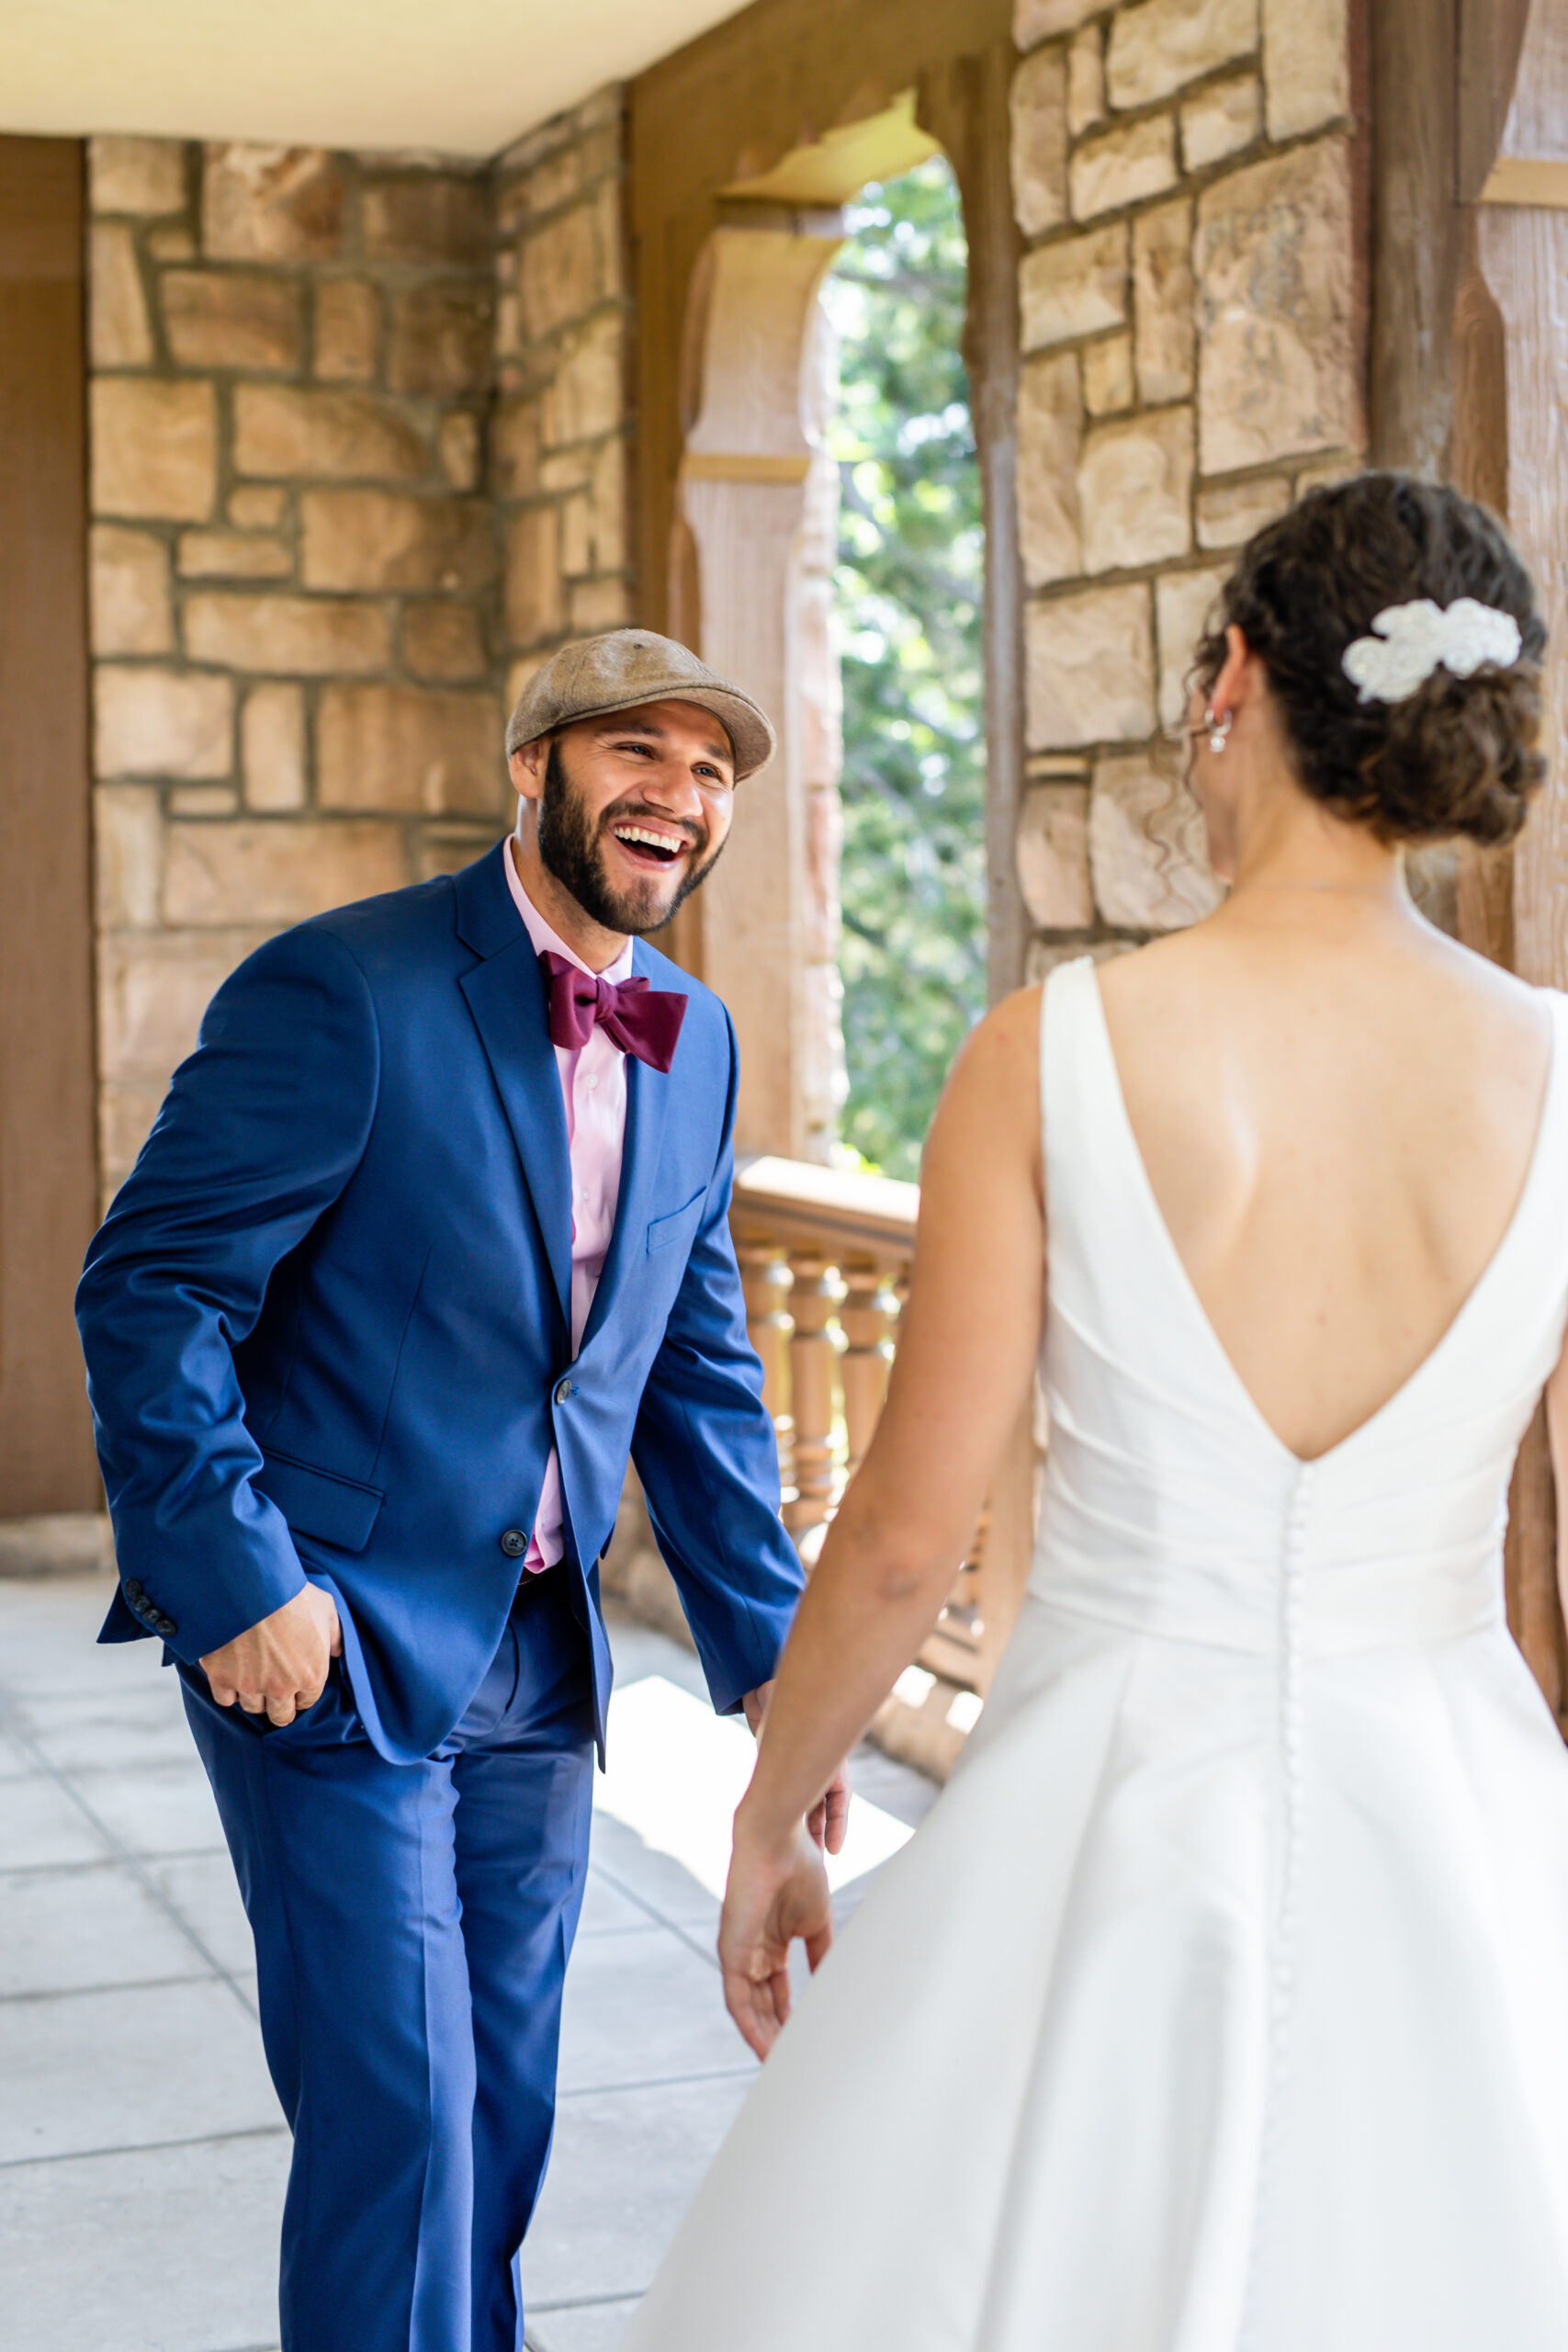 A couple has a first look in a castle venue, the man is wearing a blue suit and the woman is wearing a white dress.